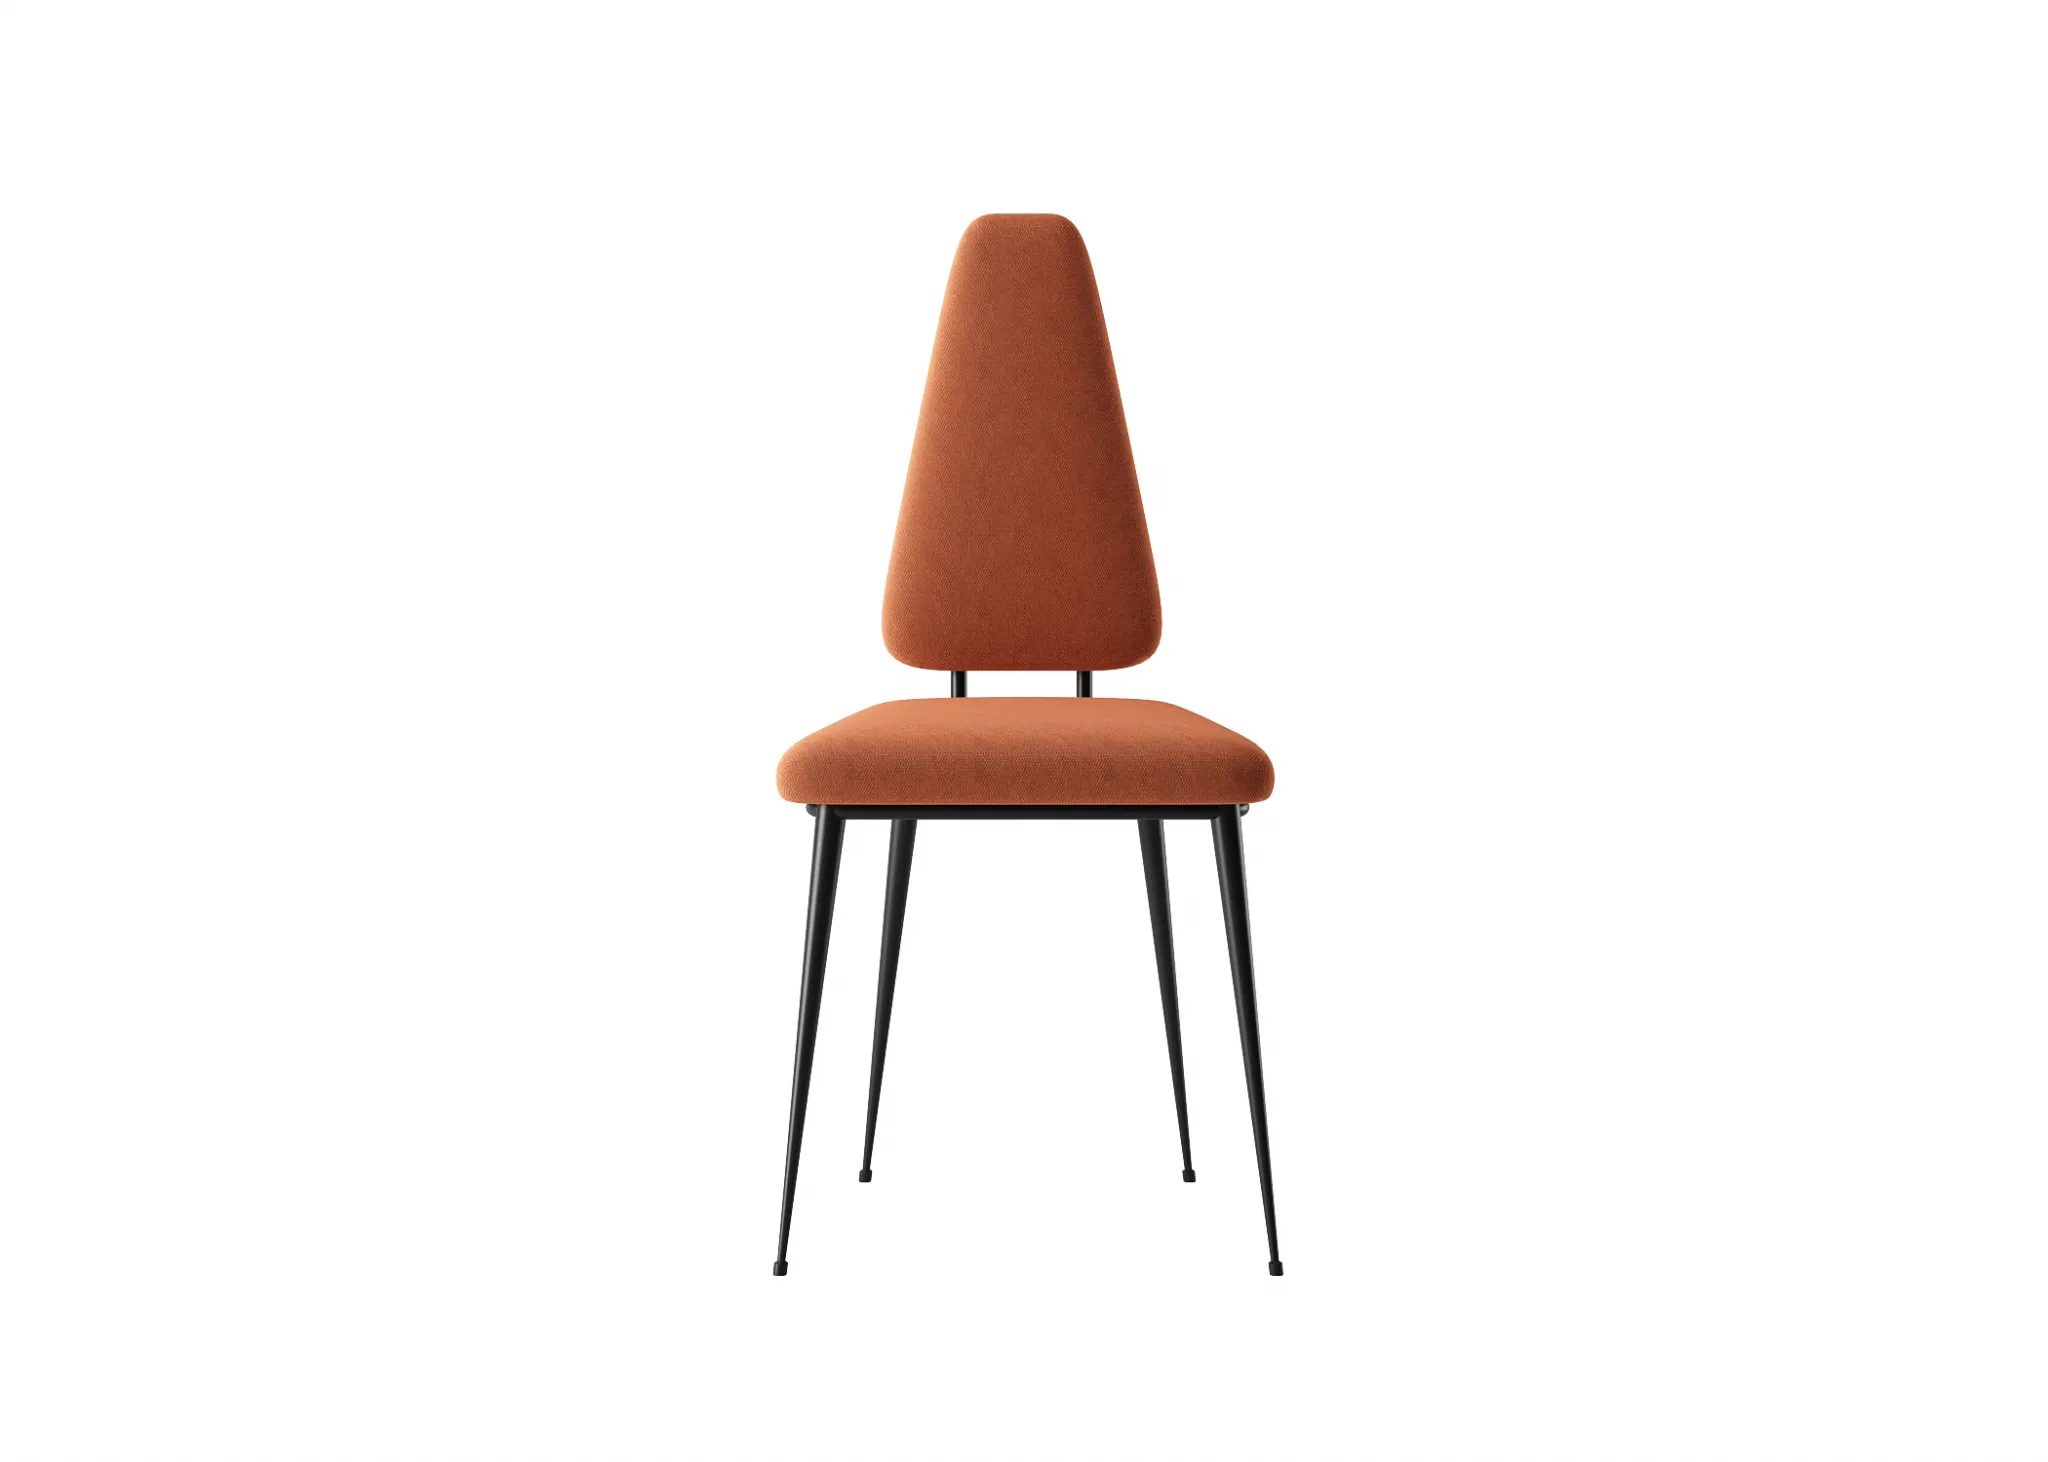 FURNITURE 3D MODELS – CHAIRS – 0360